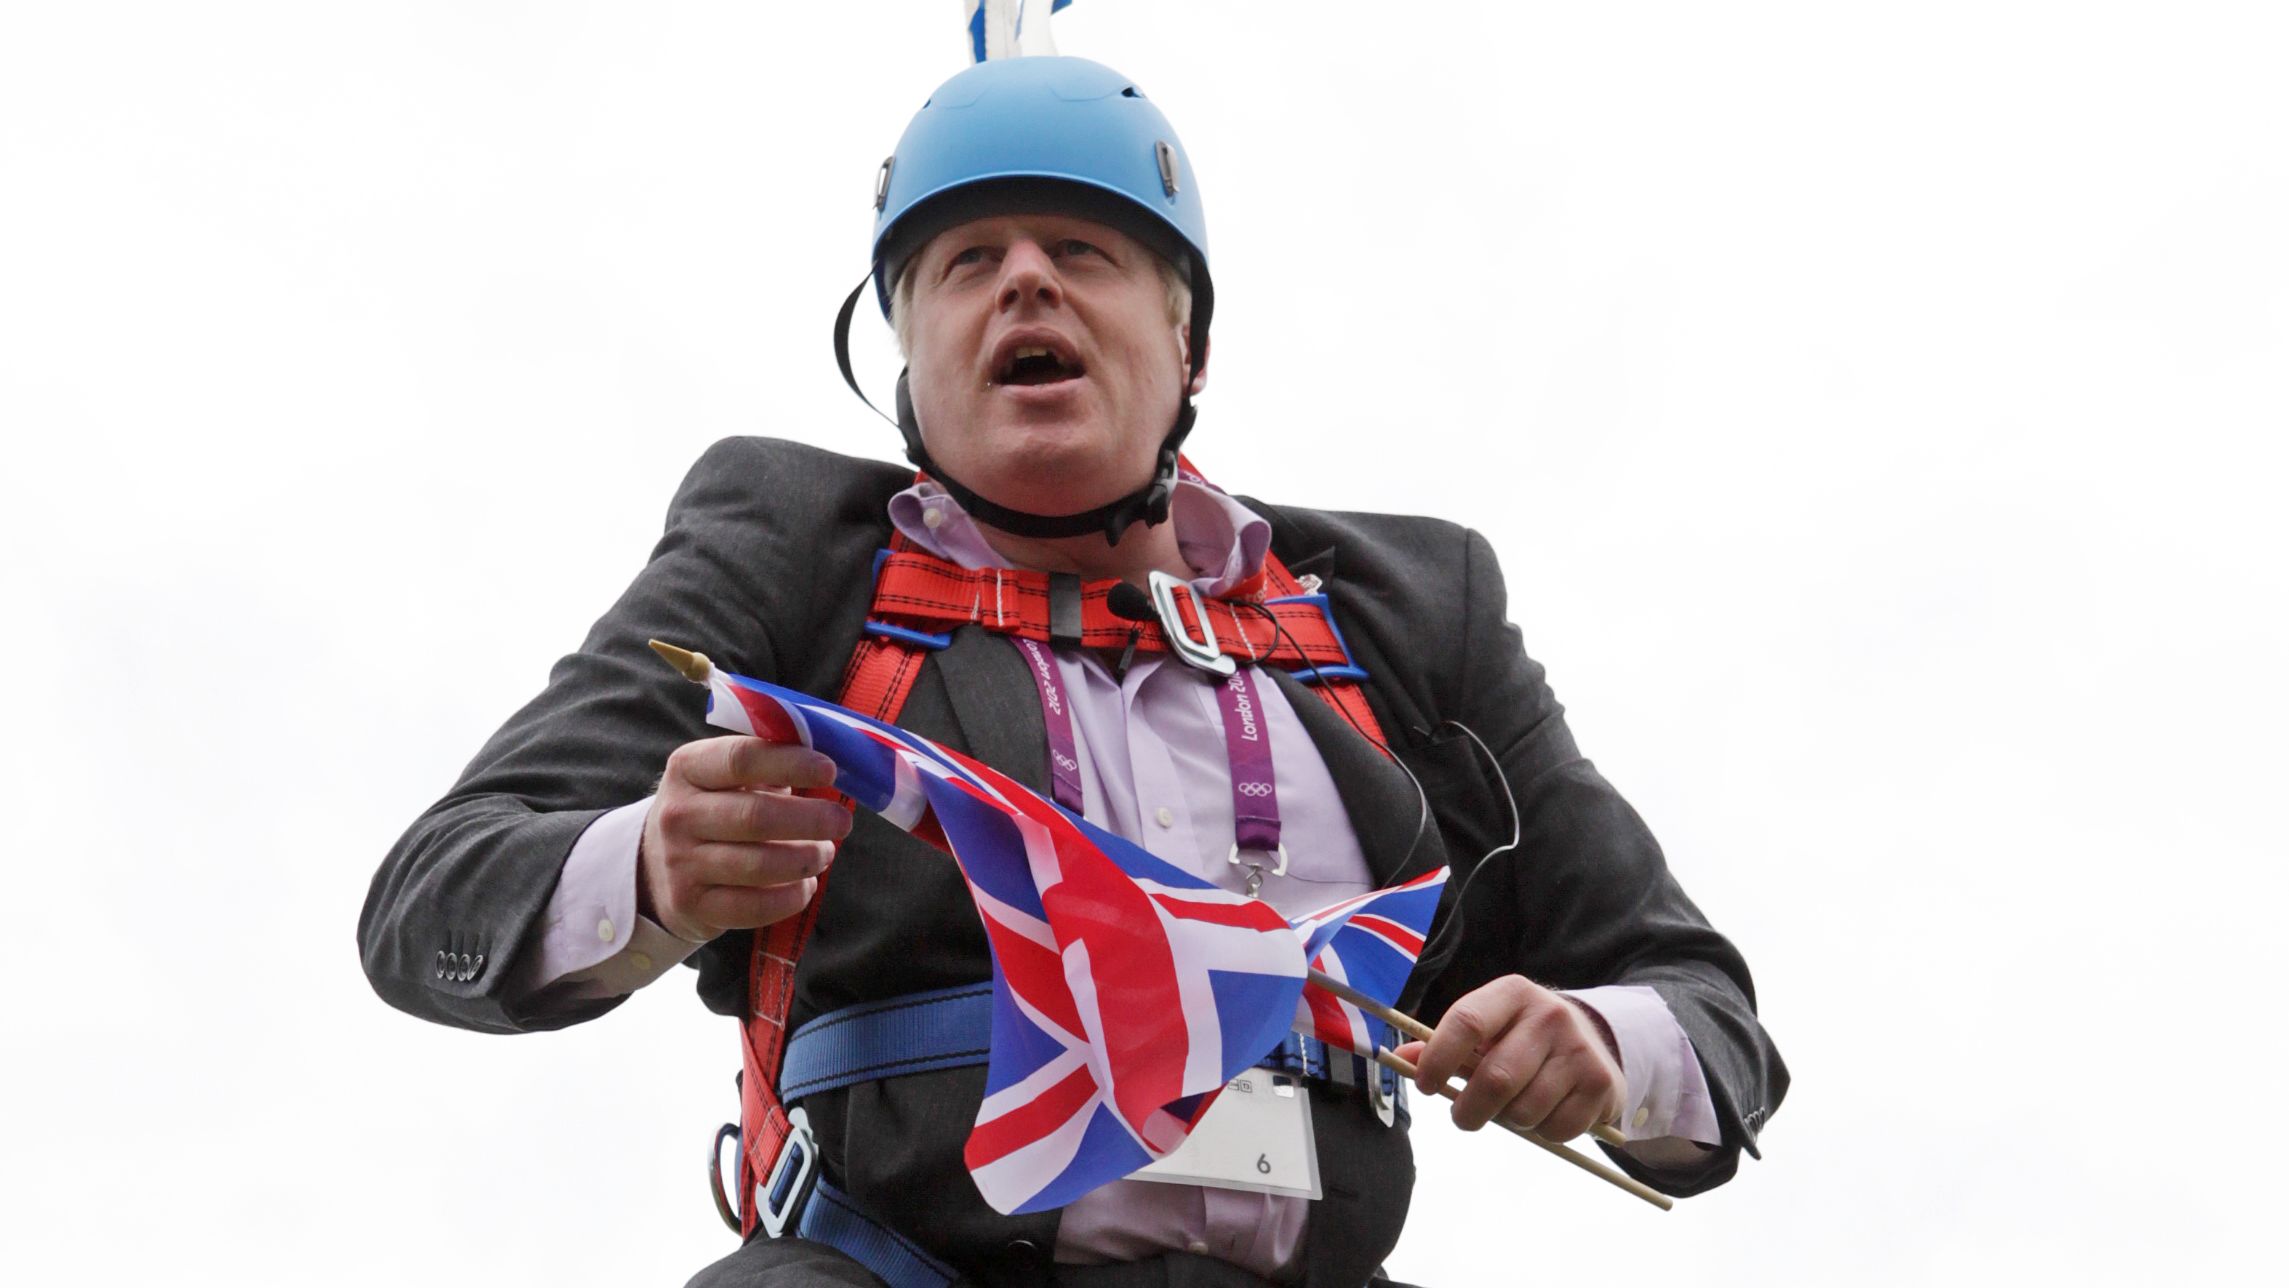 Johnson gets stuck on a zip line during an event in London's Victoria Park in August 2012.